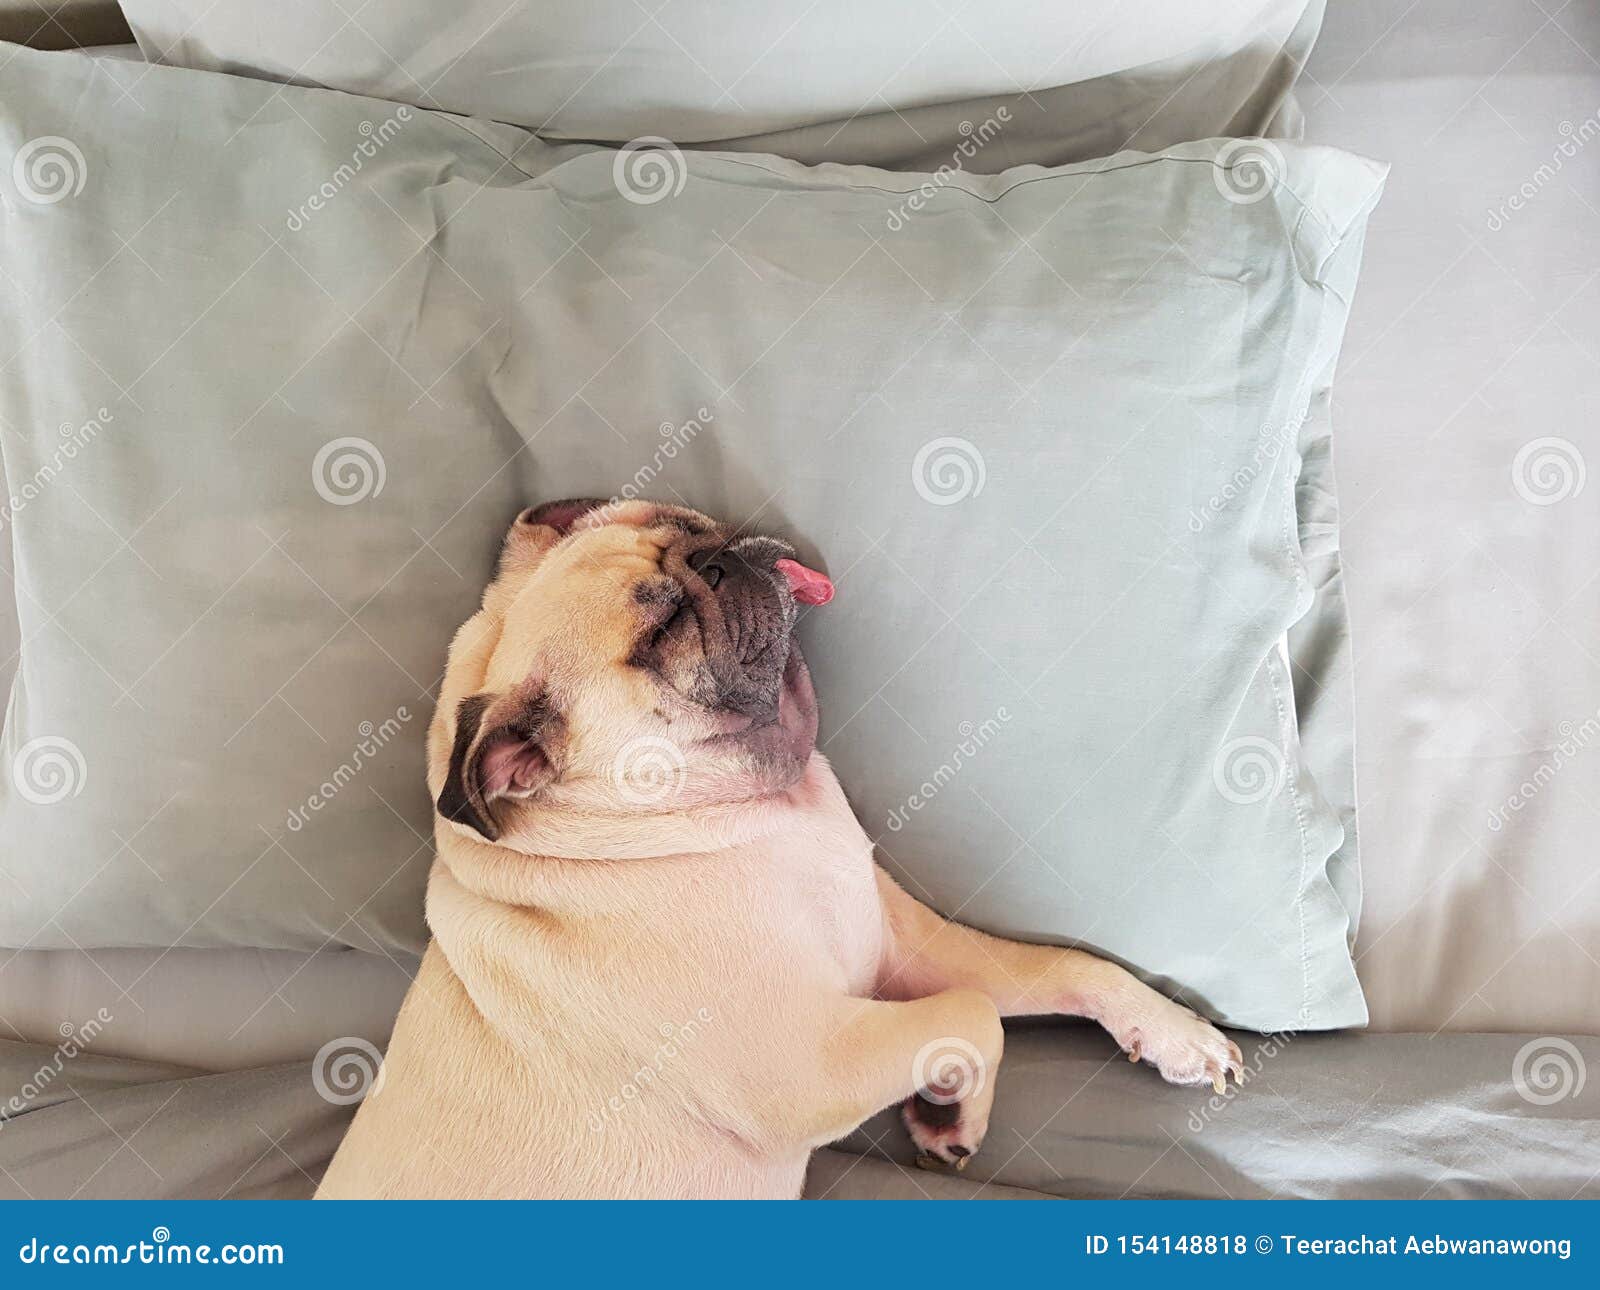 pug dog having a siesta an resting in bed on the pillow on his back , tongue sticking out looking very funny